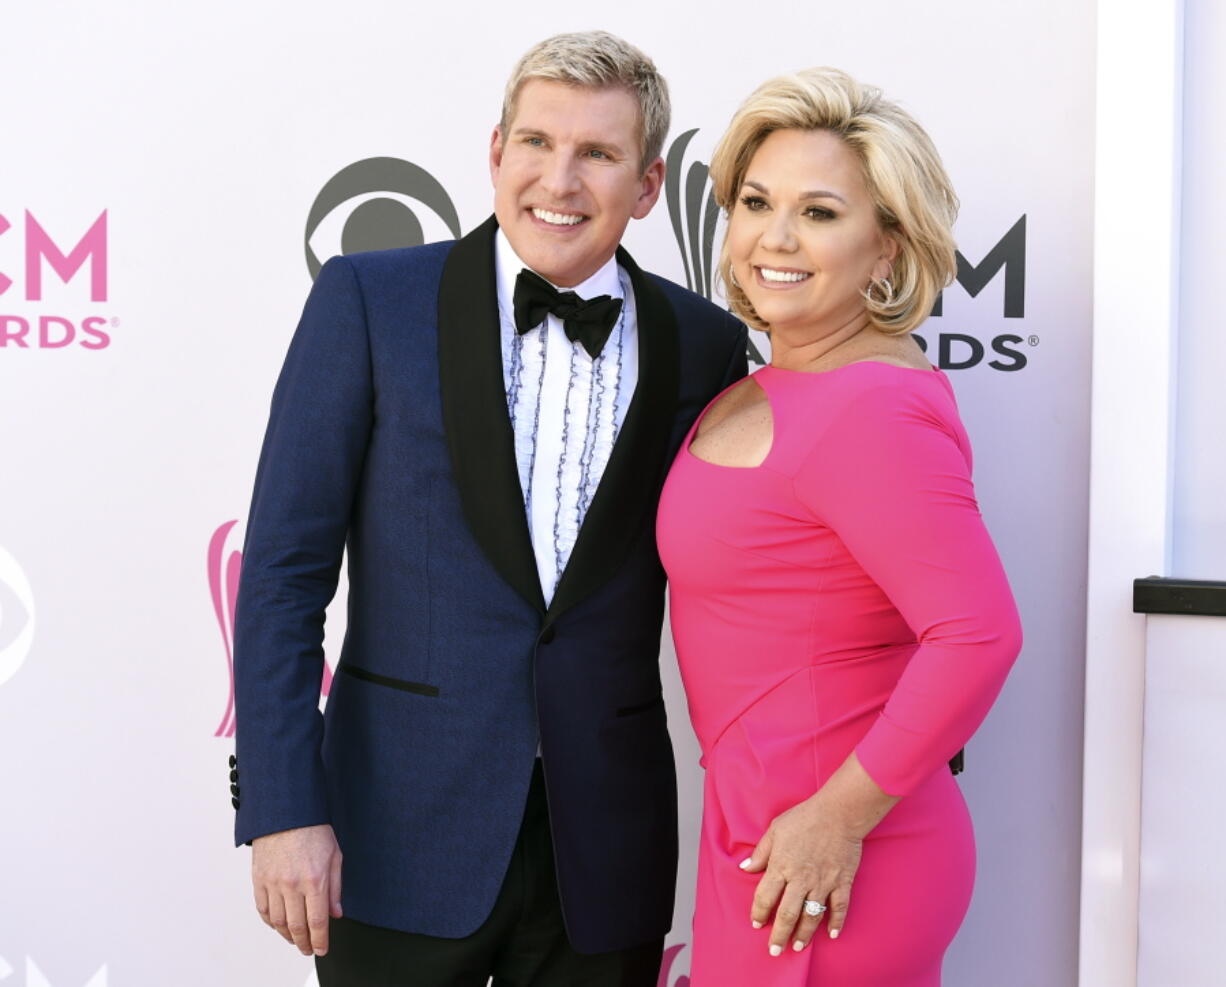 FILE - Todd Chrisley, left, and his wife, Julie Chrisley, pose for photos at the 52nd annual Academy of Country Music Awards on April 2, 2017, in Las Vegas. Todd and Julie Chrisley were driven by greed as they engaged in an extensive bank fraud scheme and then hid their wealth from tax authorities while flaunting their lavish lifestyle, federal prosecutors said, arguing the reality television stars should receive lengthy prison sentences. They were found guilty on federal charges in June and are set to be sentenced by U.S. District Judge Eleanor Ross in a hearing that begins Monday, Nov. 21.